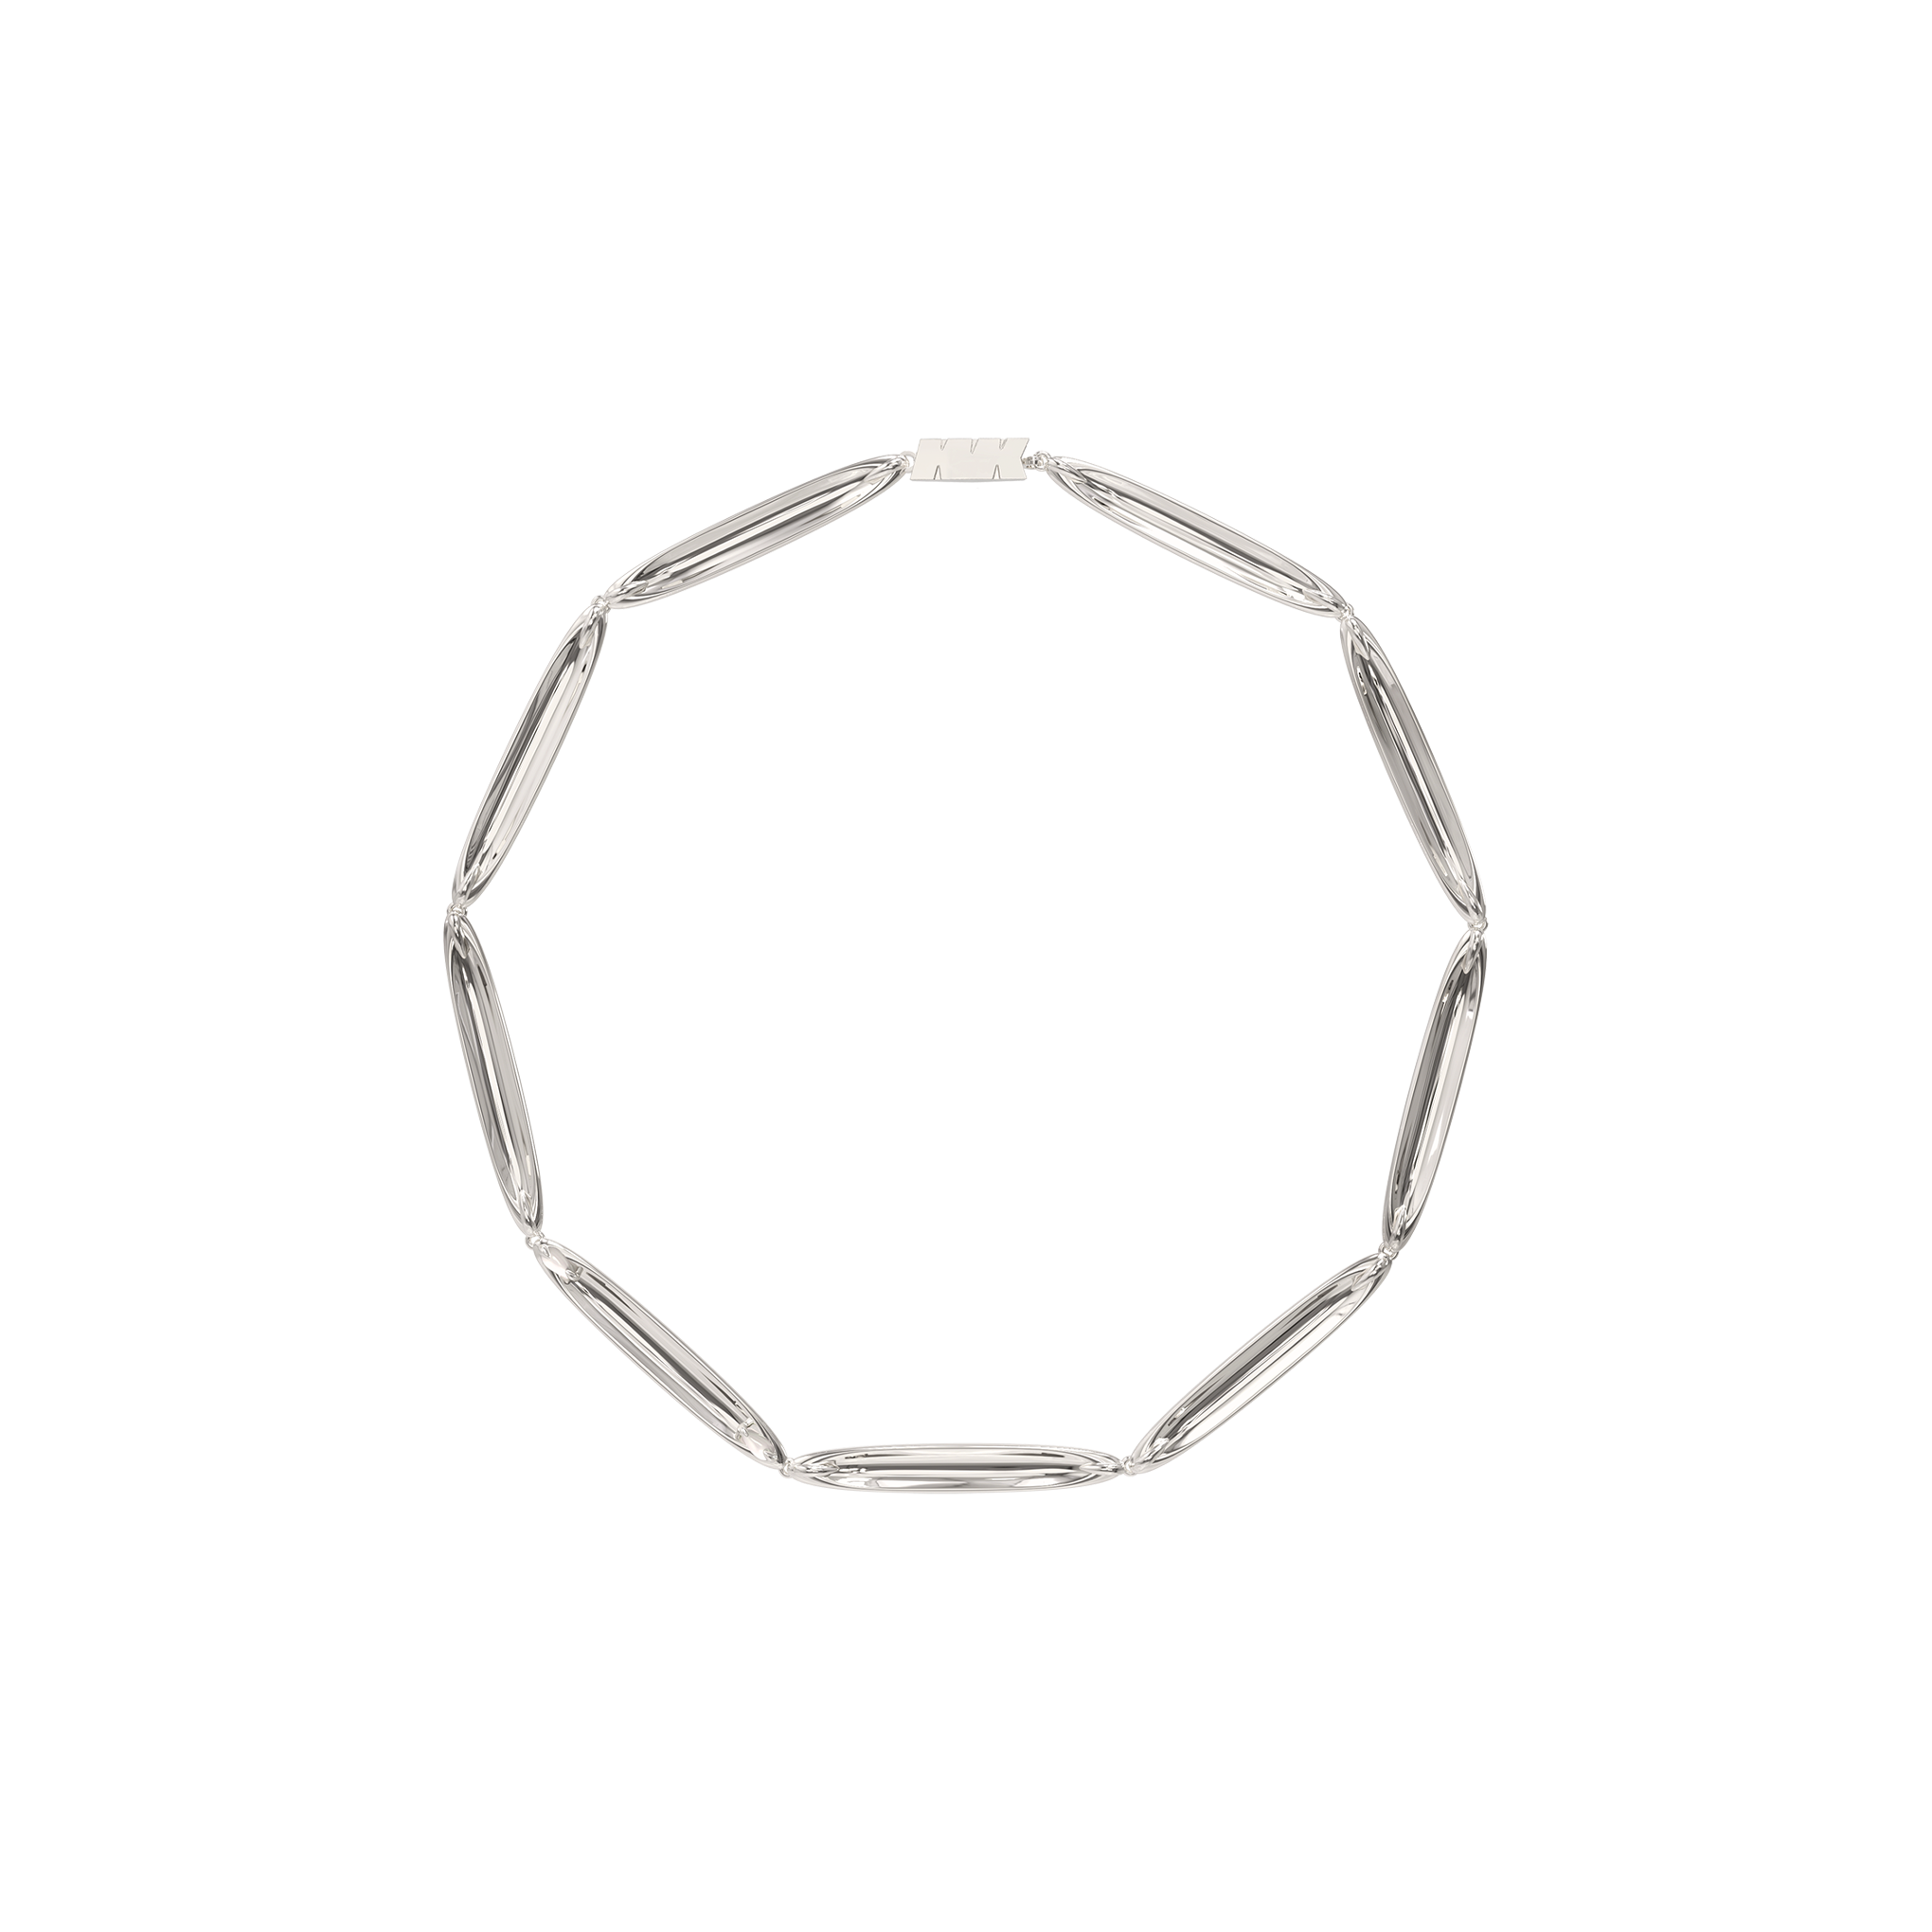 WHITE SHELL CONCAVE CHOKER NECKLACE